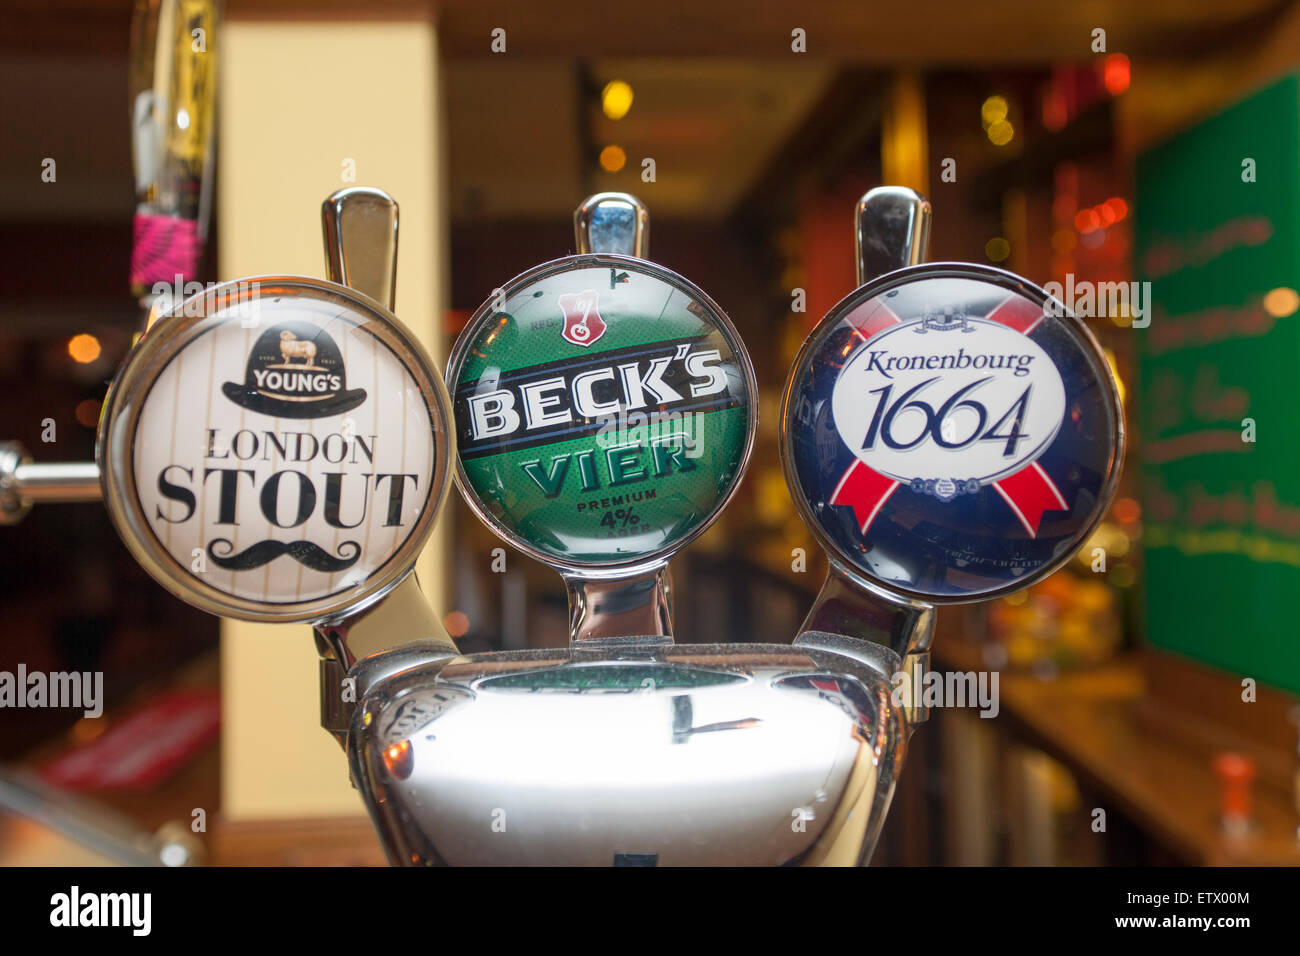 Pub beer pump with London Stout, Becks, Kronenbourg 1664 beers. Stock Photo